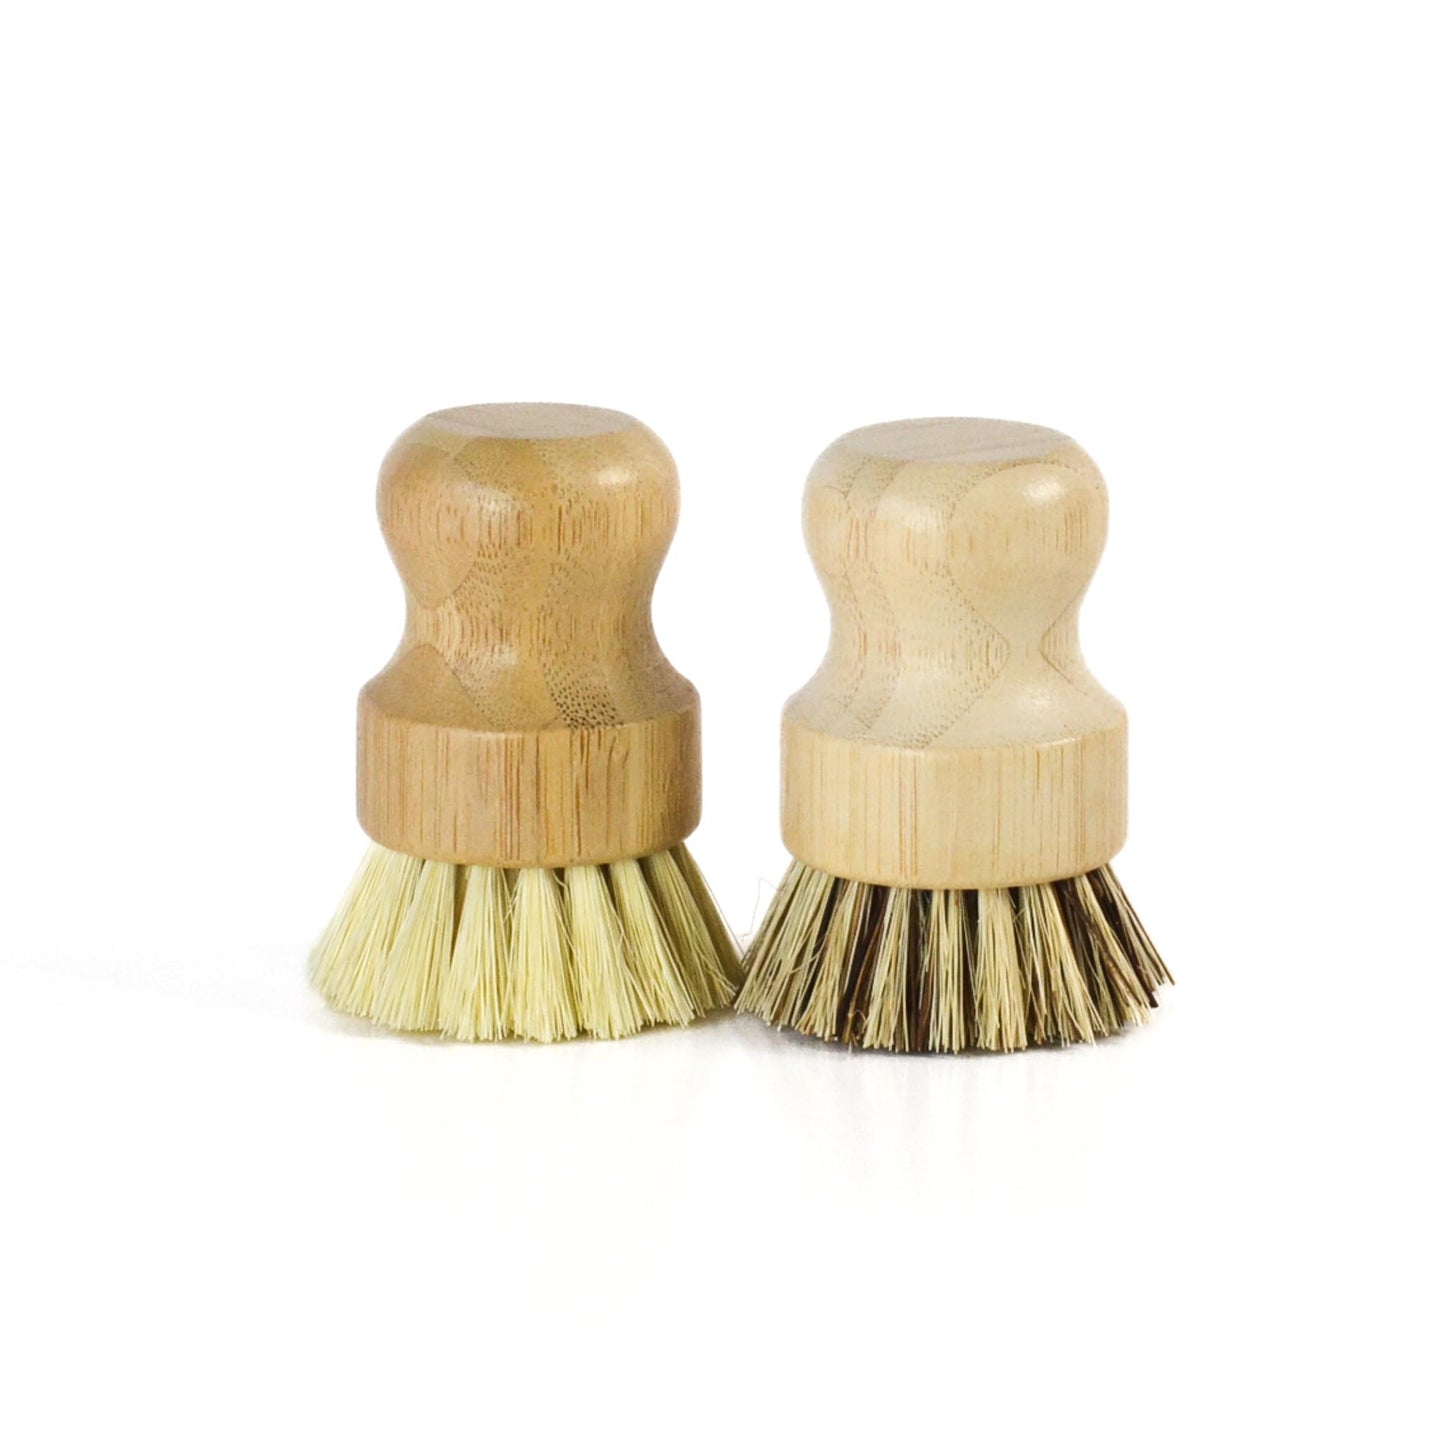 stop microplastic shedding with compostable scrub brushes